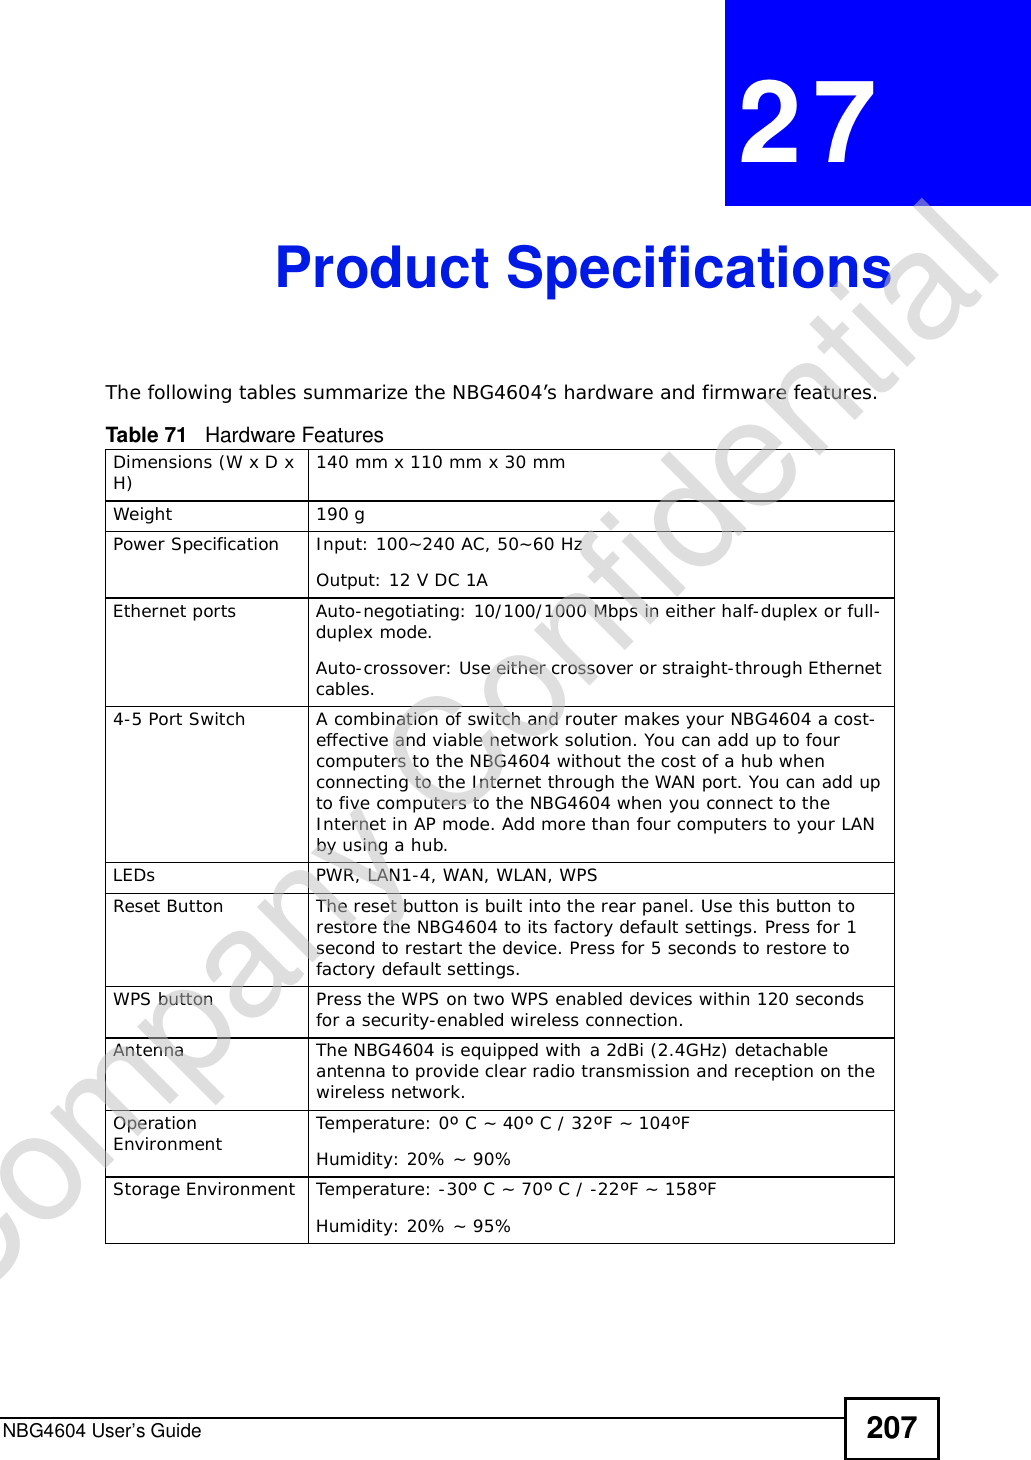 NBG4604 User’s Guide 207CHAPTER 27Product SpecificationsThe following tables summarize the NBG4604’s hardware and firmware features.Table 71   Hardware FeaturesDimensions (W x D x H) 140 mm x 110 mm x 30 mmWeight 190 gPower Specification Input: 100~240 AC, 50~60 HzOutput: 12 V DC 1AEthernet portsAuto-negotiating: 10/100/1000 Mbps in either half-duplex or full-duplex mode.Auto-crossover: Use either crossover or straight-through Ethernet cables.4-5 Port Switch A combination of switch and router makes your NBG4604 a cost-effective and viable network solution. You can add up to four computers to the NBG4604 without the cost of a hub when connecting to the Internet through the WAN port. You can add up to five computers to the NBG4604 when you connect to the Internet in AP mode. Add more than four computers to your LAN by using a hub.LEDsPWR, LAN1-4, WAN, WLAN, WPSReset Button The reset button is built into the rear panel. Use this button to restore the NBG4604 to its factory default settings. Press for 1 second to restart the device. Press for 5 seconds to restore to factory default settings.WPS button Press the WPS on two WPS enabled devices within 120 seconds for a security-enabled wireless connection.Antenna The NBG4604 is equipped witha 2dBi (2.4GHz) detachable antenna to provide clear radio transmission and reception on the wireless network. Operation Environment Temperature: 0º C ~ 40º C / 32ºF ~ 104ºFHumidity: 20% ~ 90% Storage Environment Temperature: -30º C ~ 70º C / -22ºF ~ 158ºFHumidity: 20% ~ 95% Company Confidential